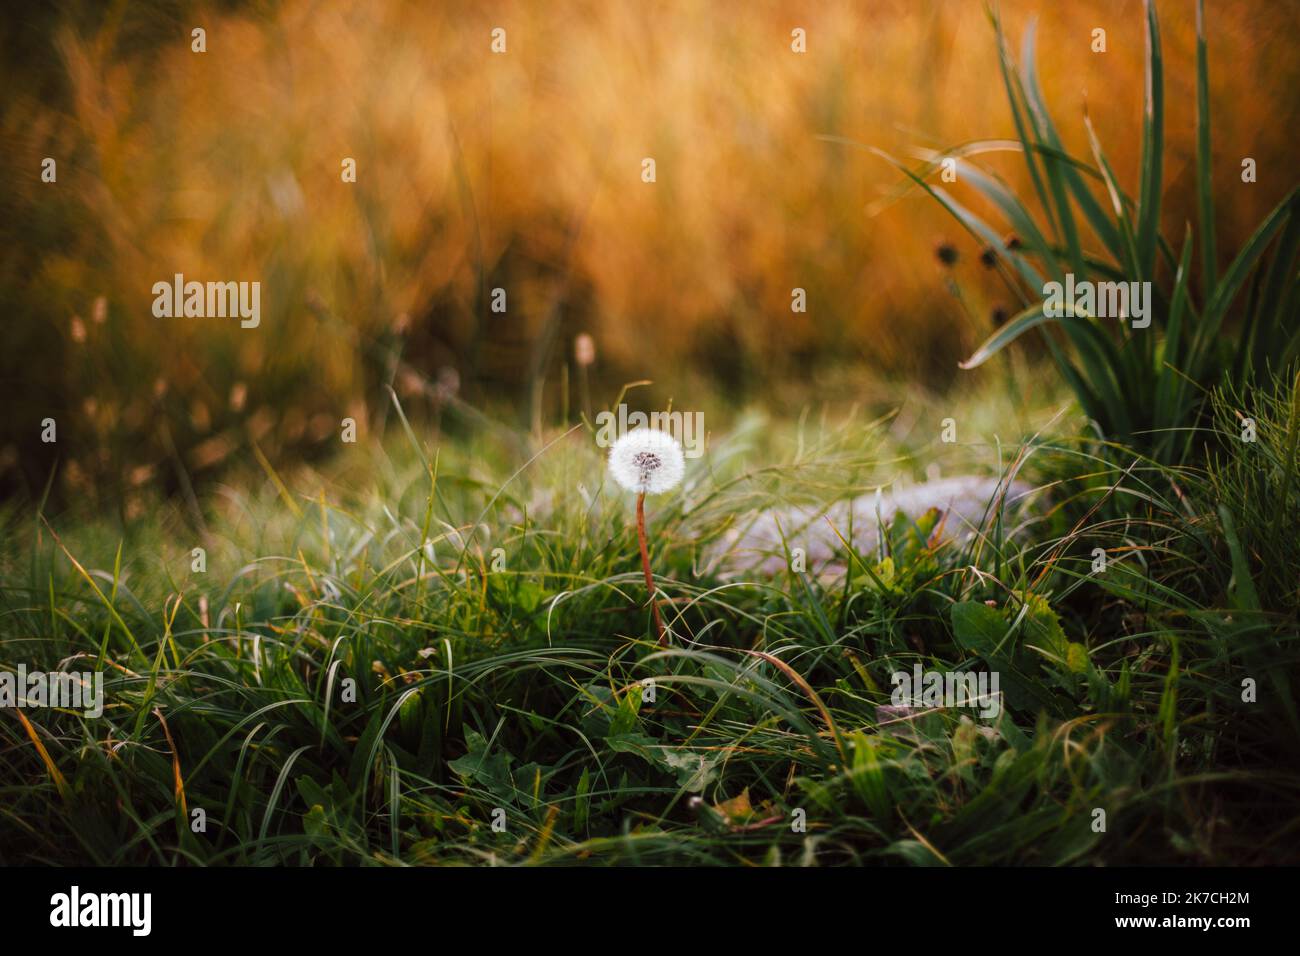 Dandelion growing on field in park during autumn Stock Photo